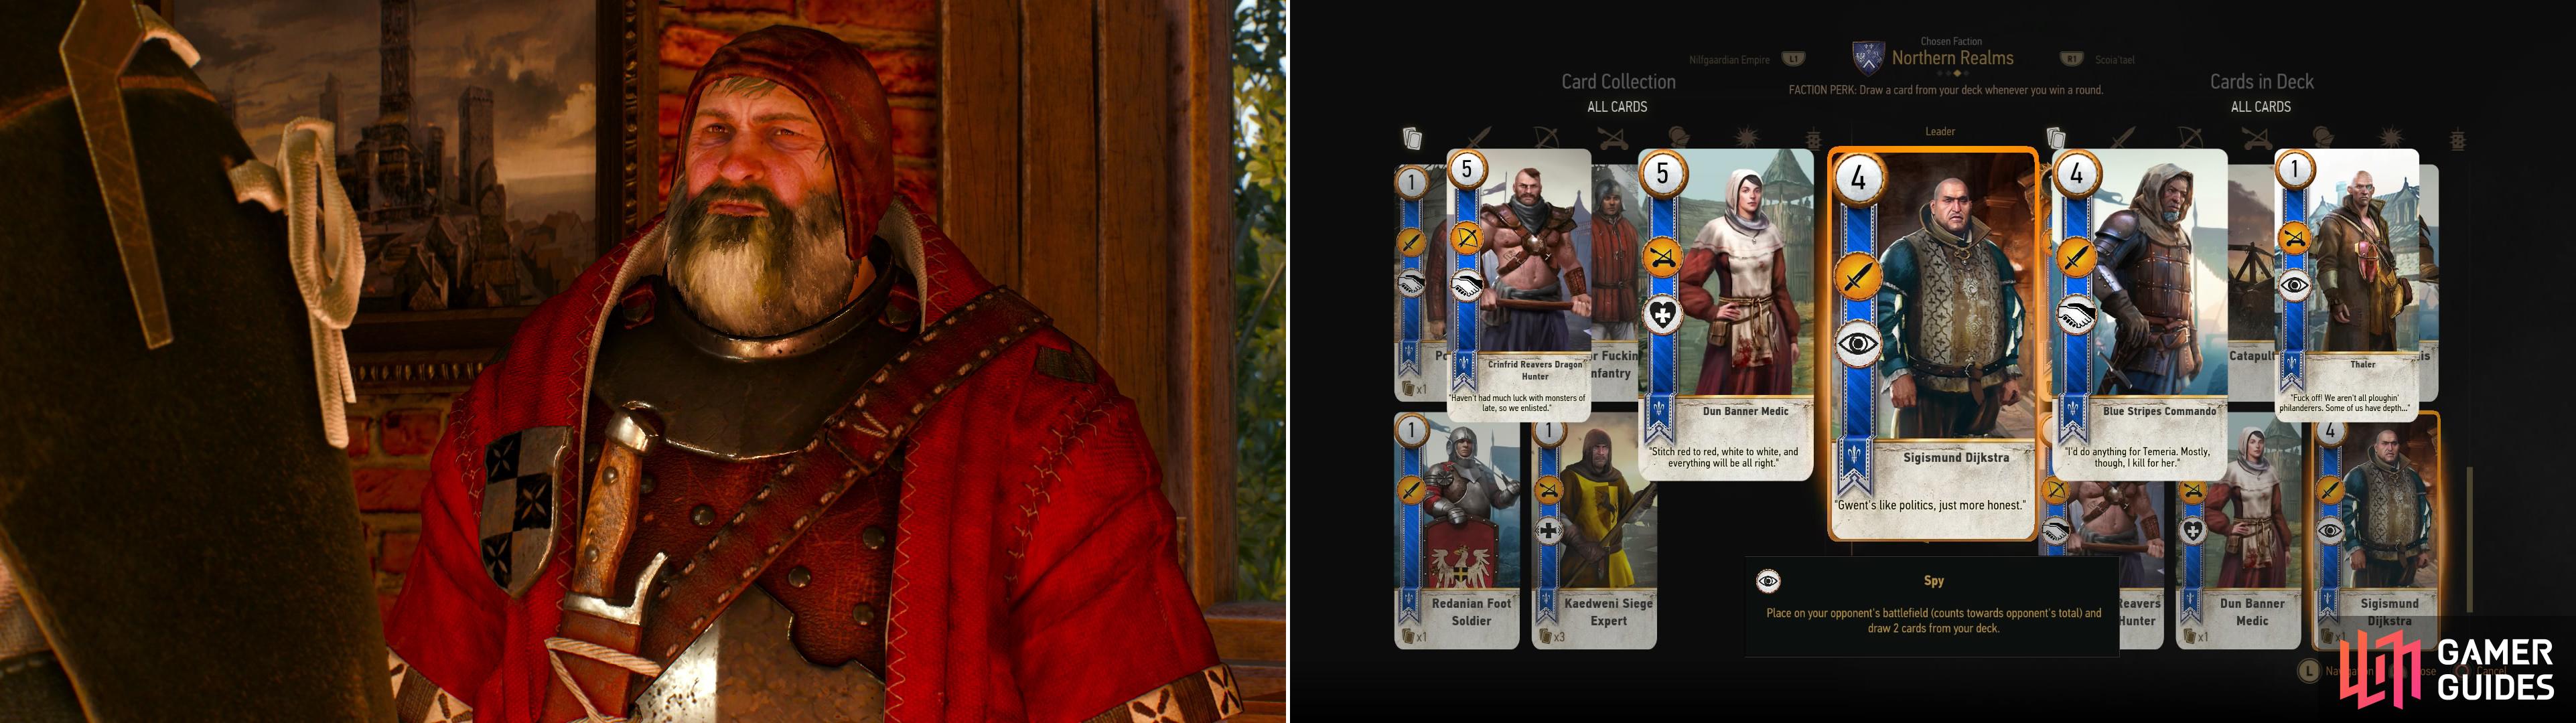 You can play the Bloody Baron (left) to win the handy Sigismund Dijkstra card (right).